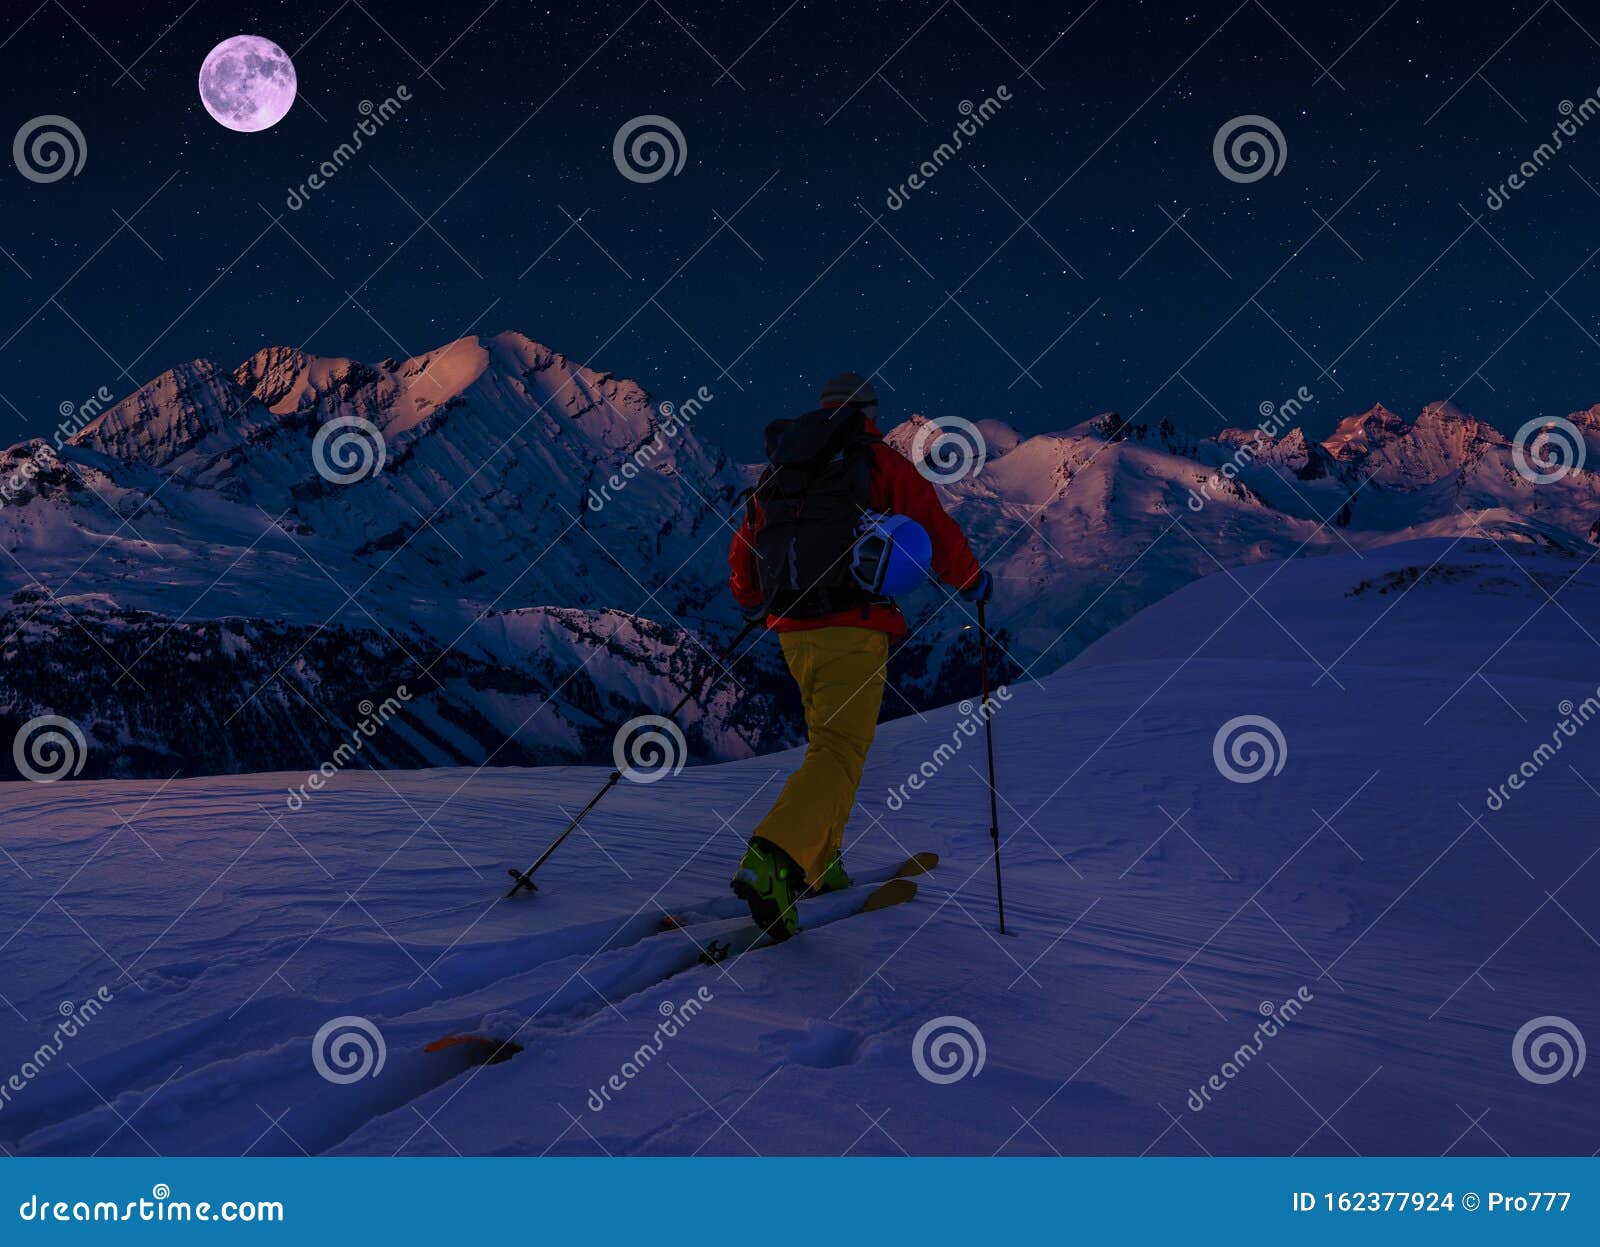 scenic night backcountry ski panorama sunset landscape of crans-montana range in swiss alps mountains with peak in background,